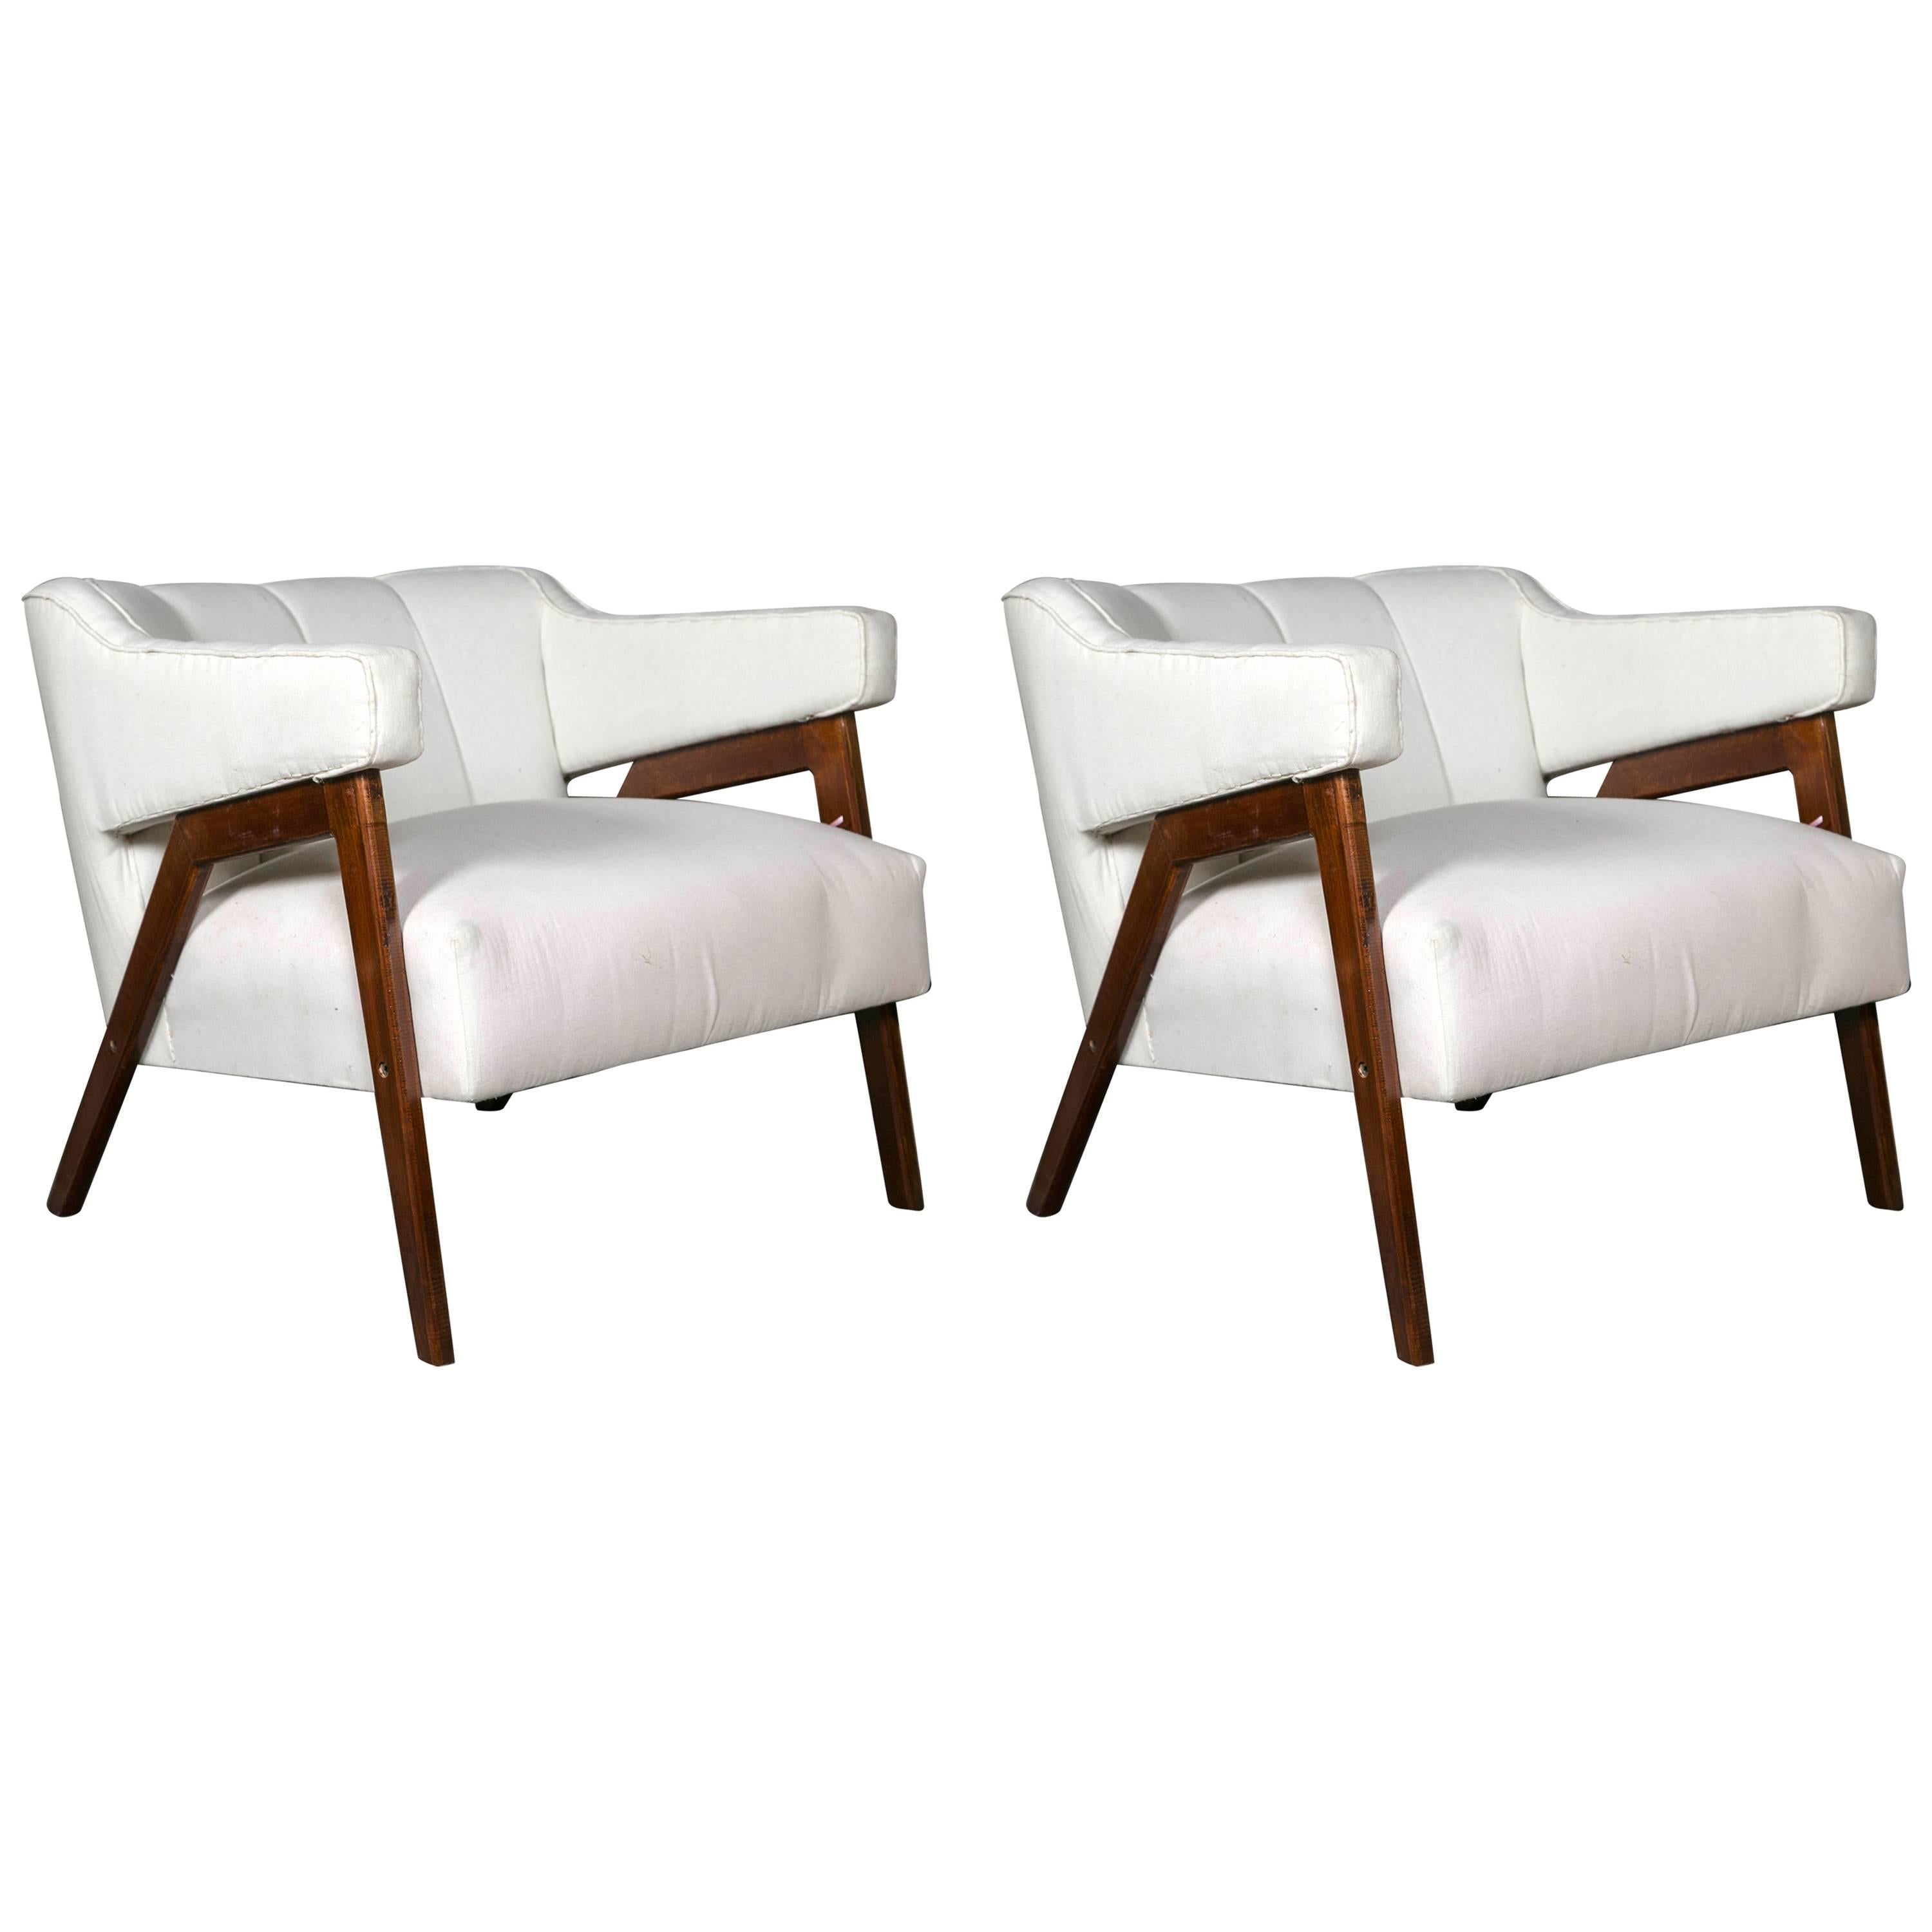 Pair of Mid-Century Modern Arm Lounge Chairs